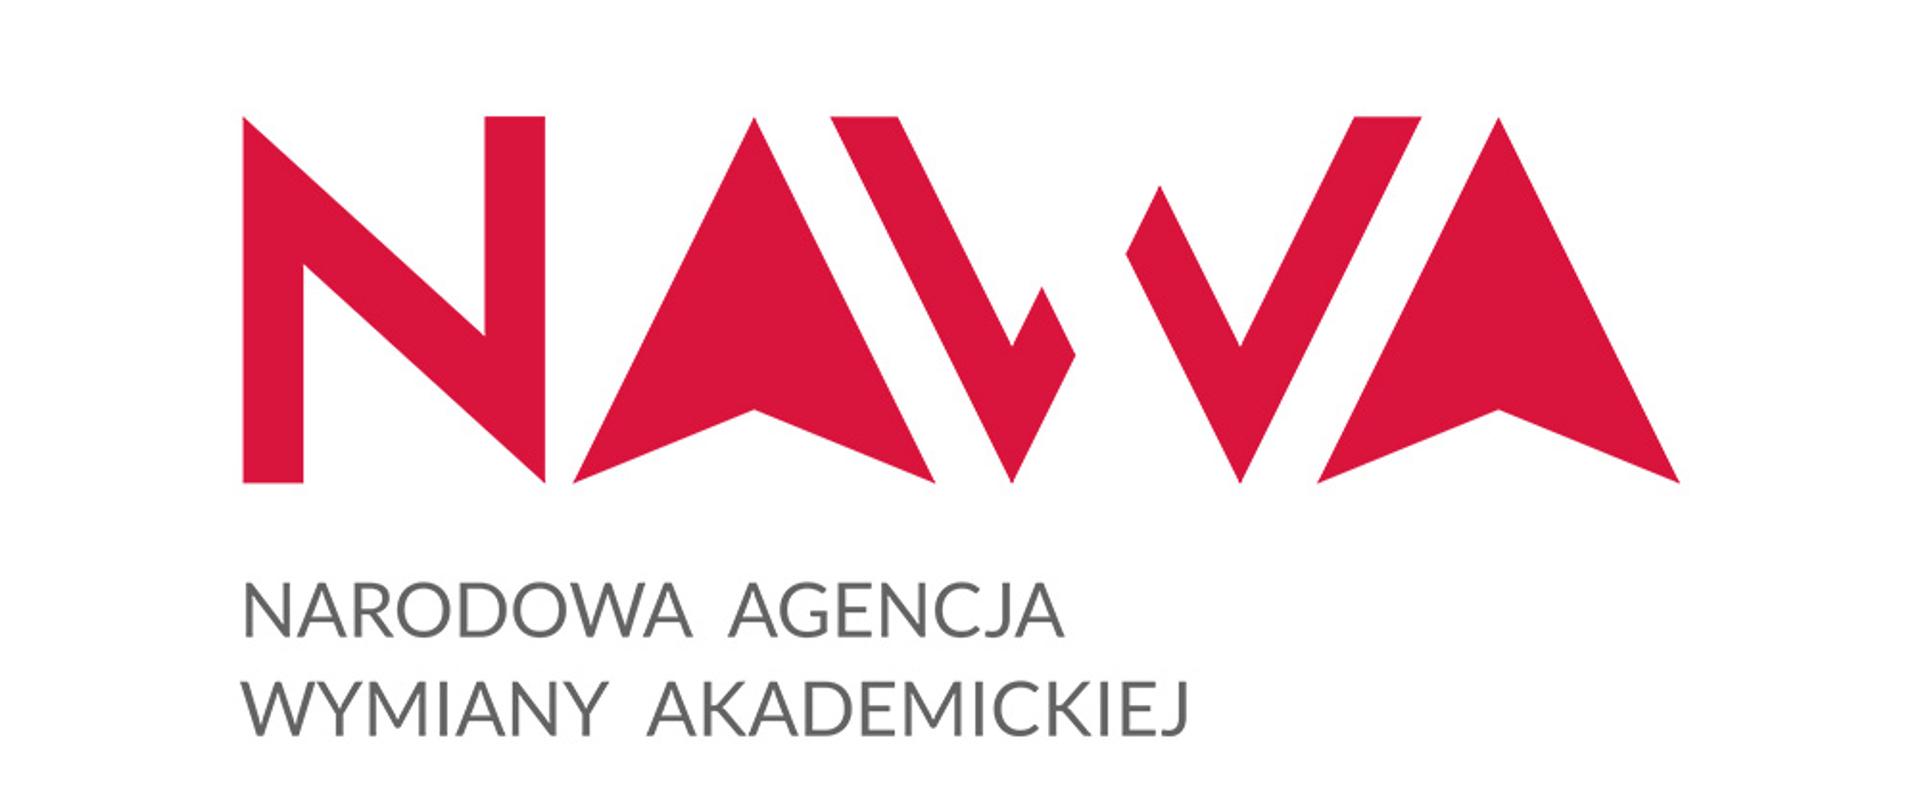 NAWA summer courses of the Polish language and culture
